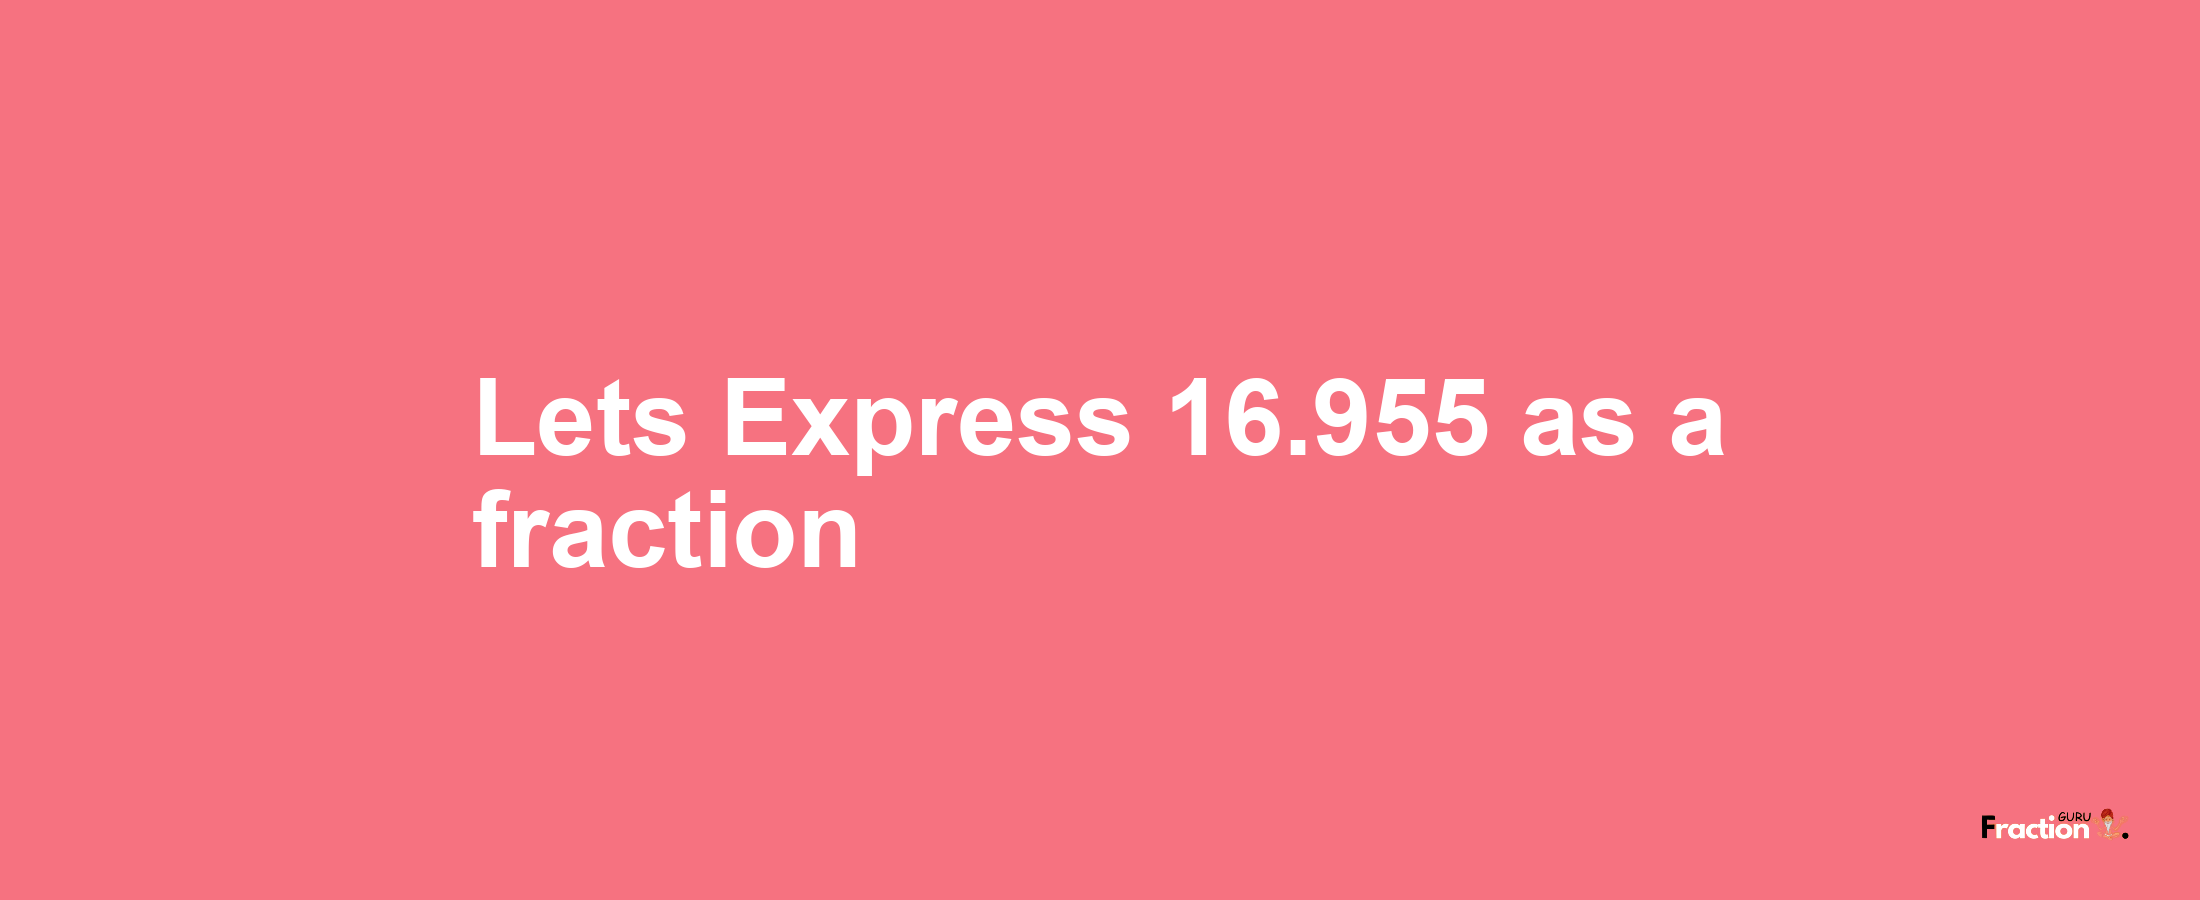 Lets Express 16.955 as afraction